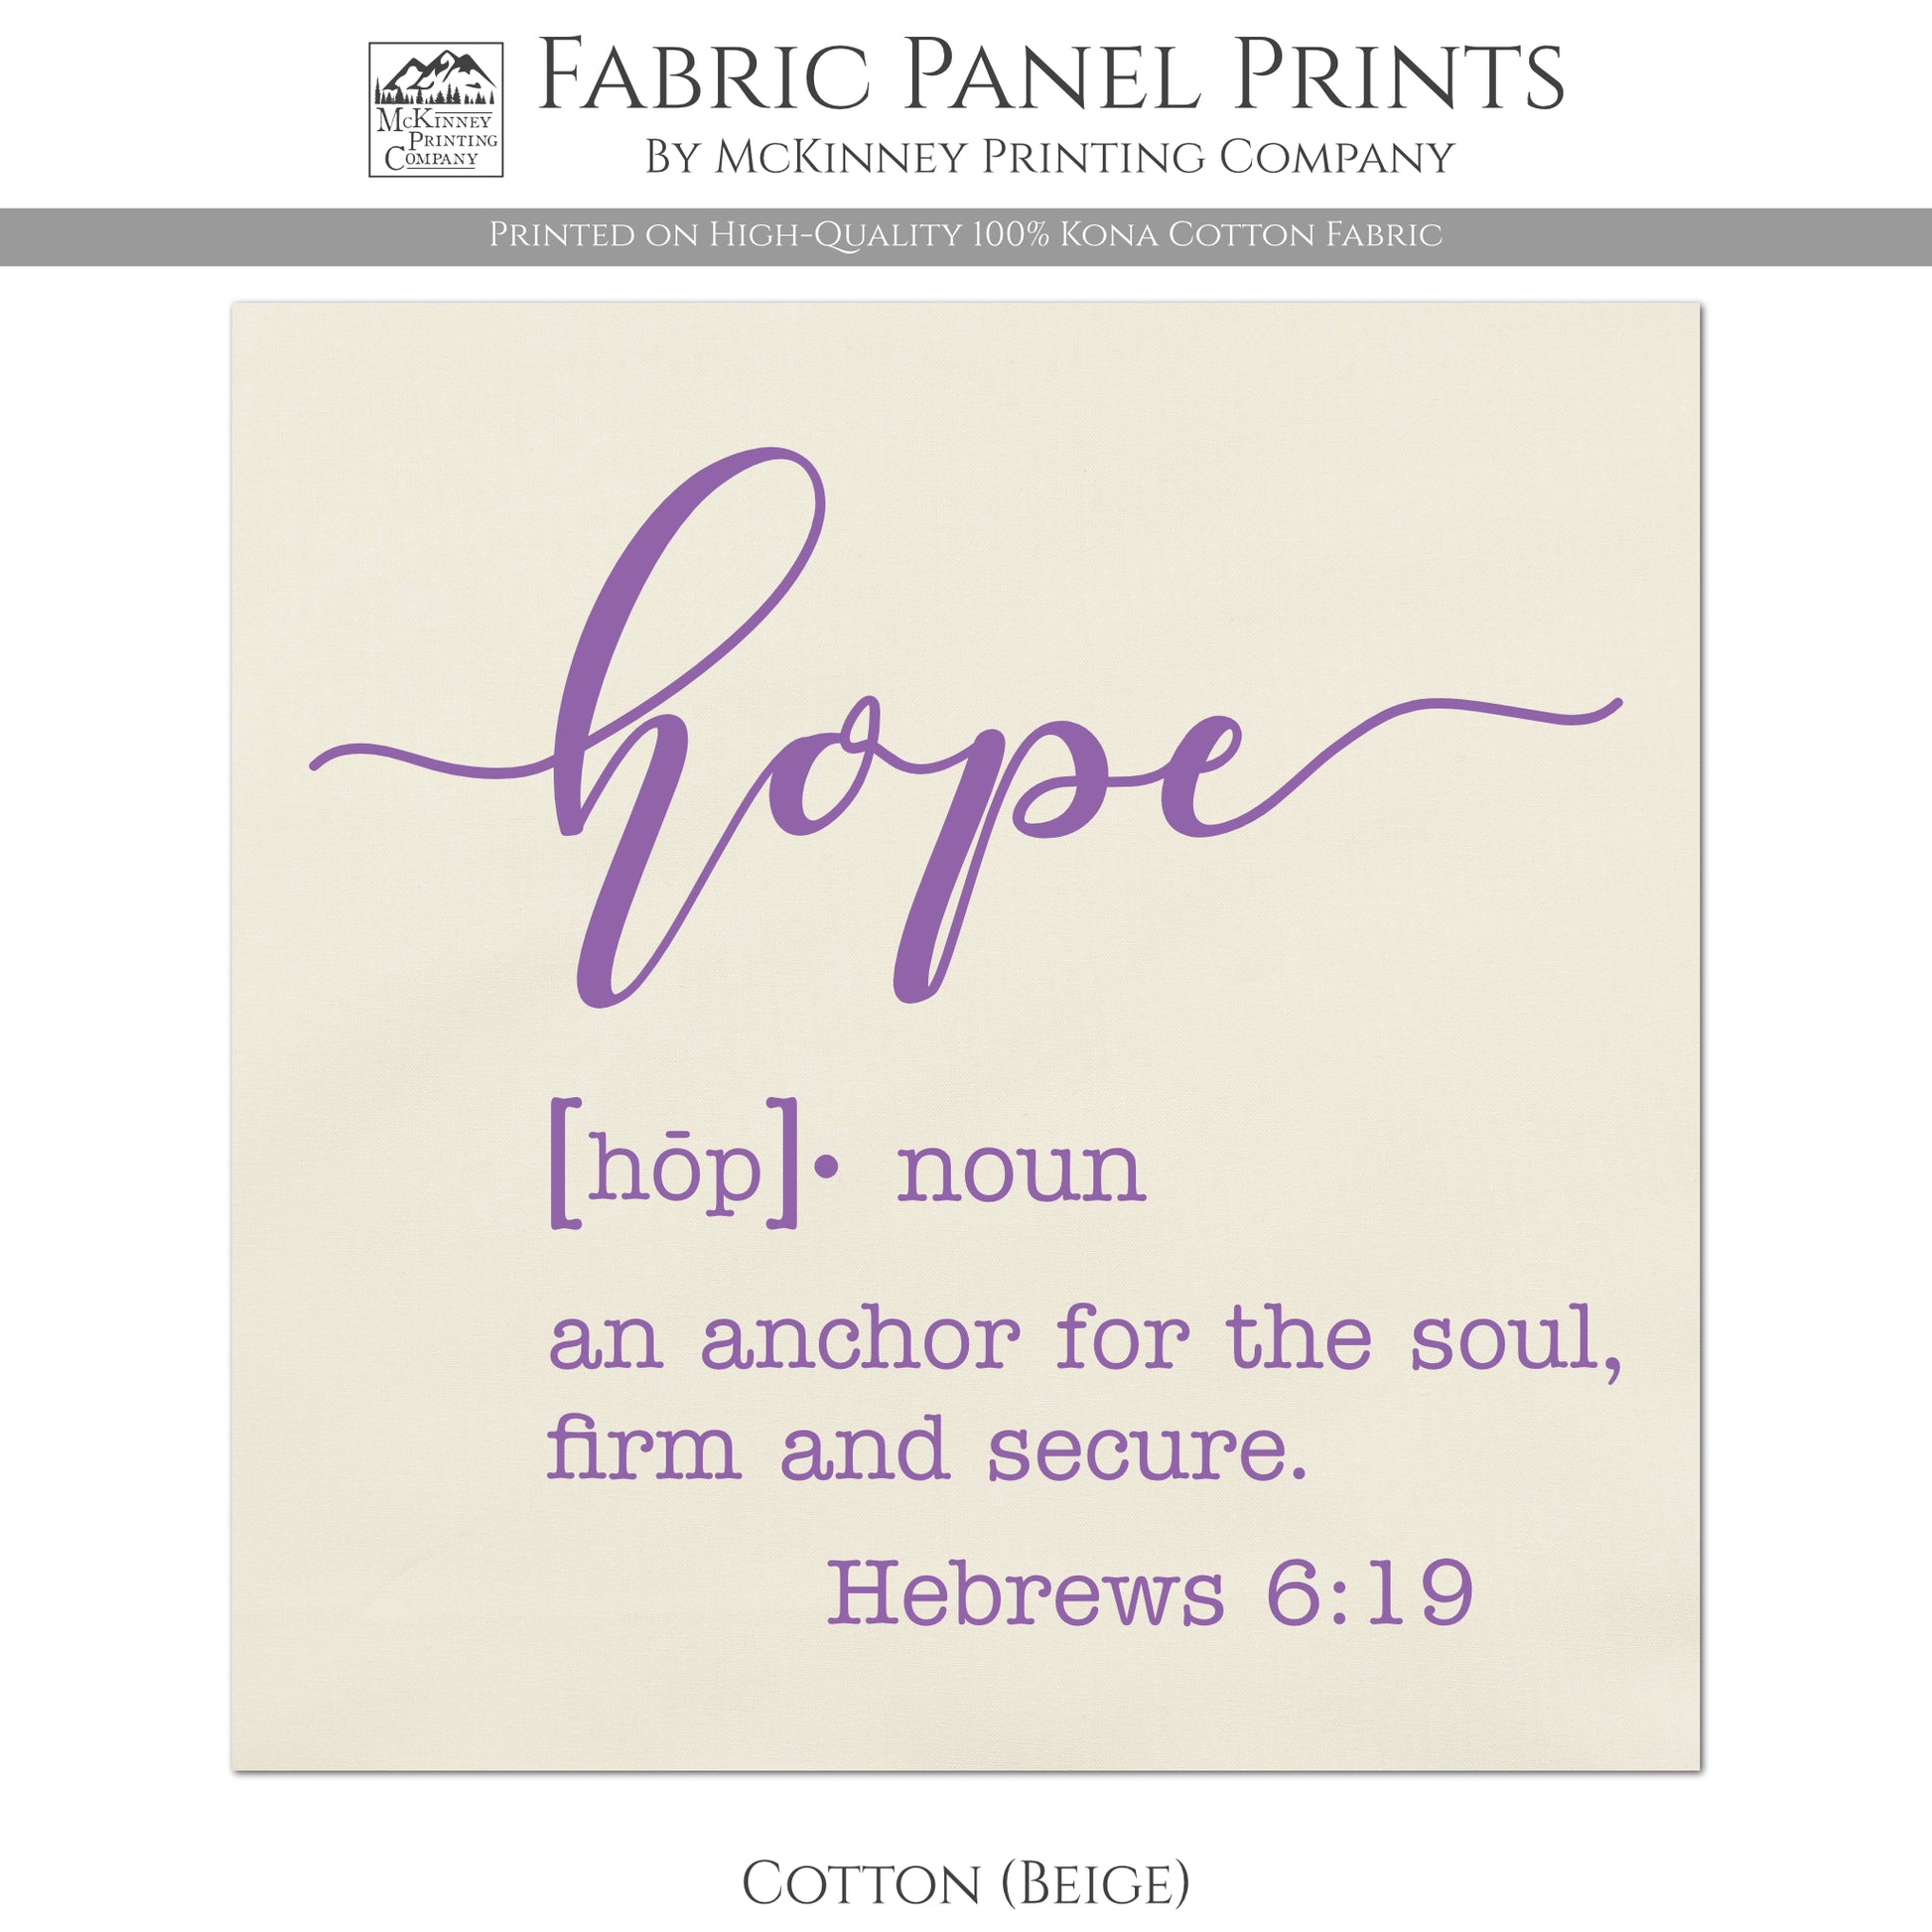 Hope Fabric - An Anchor for the soul, firm and secure - Hebrews 6:19 - Cotton